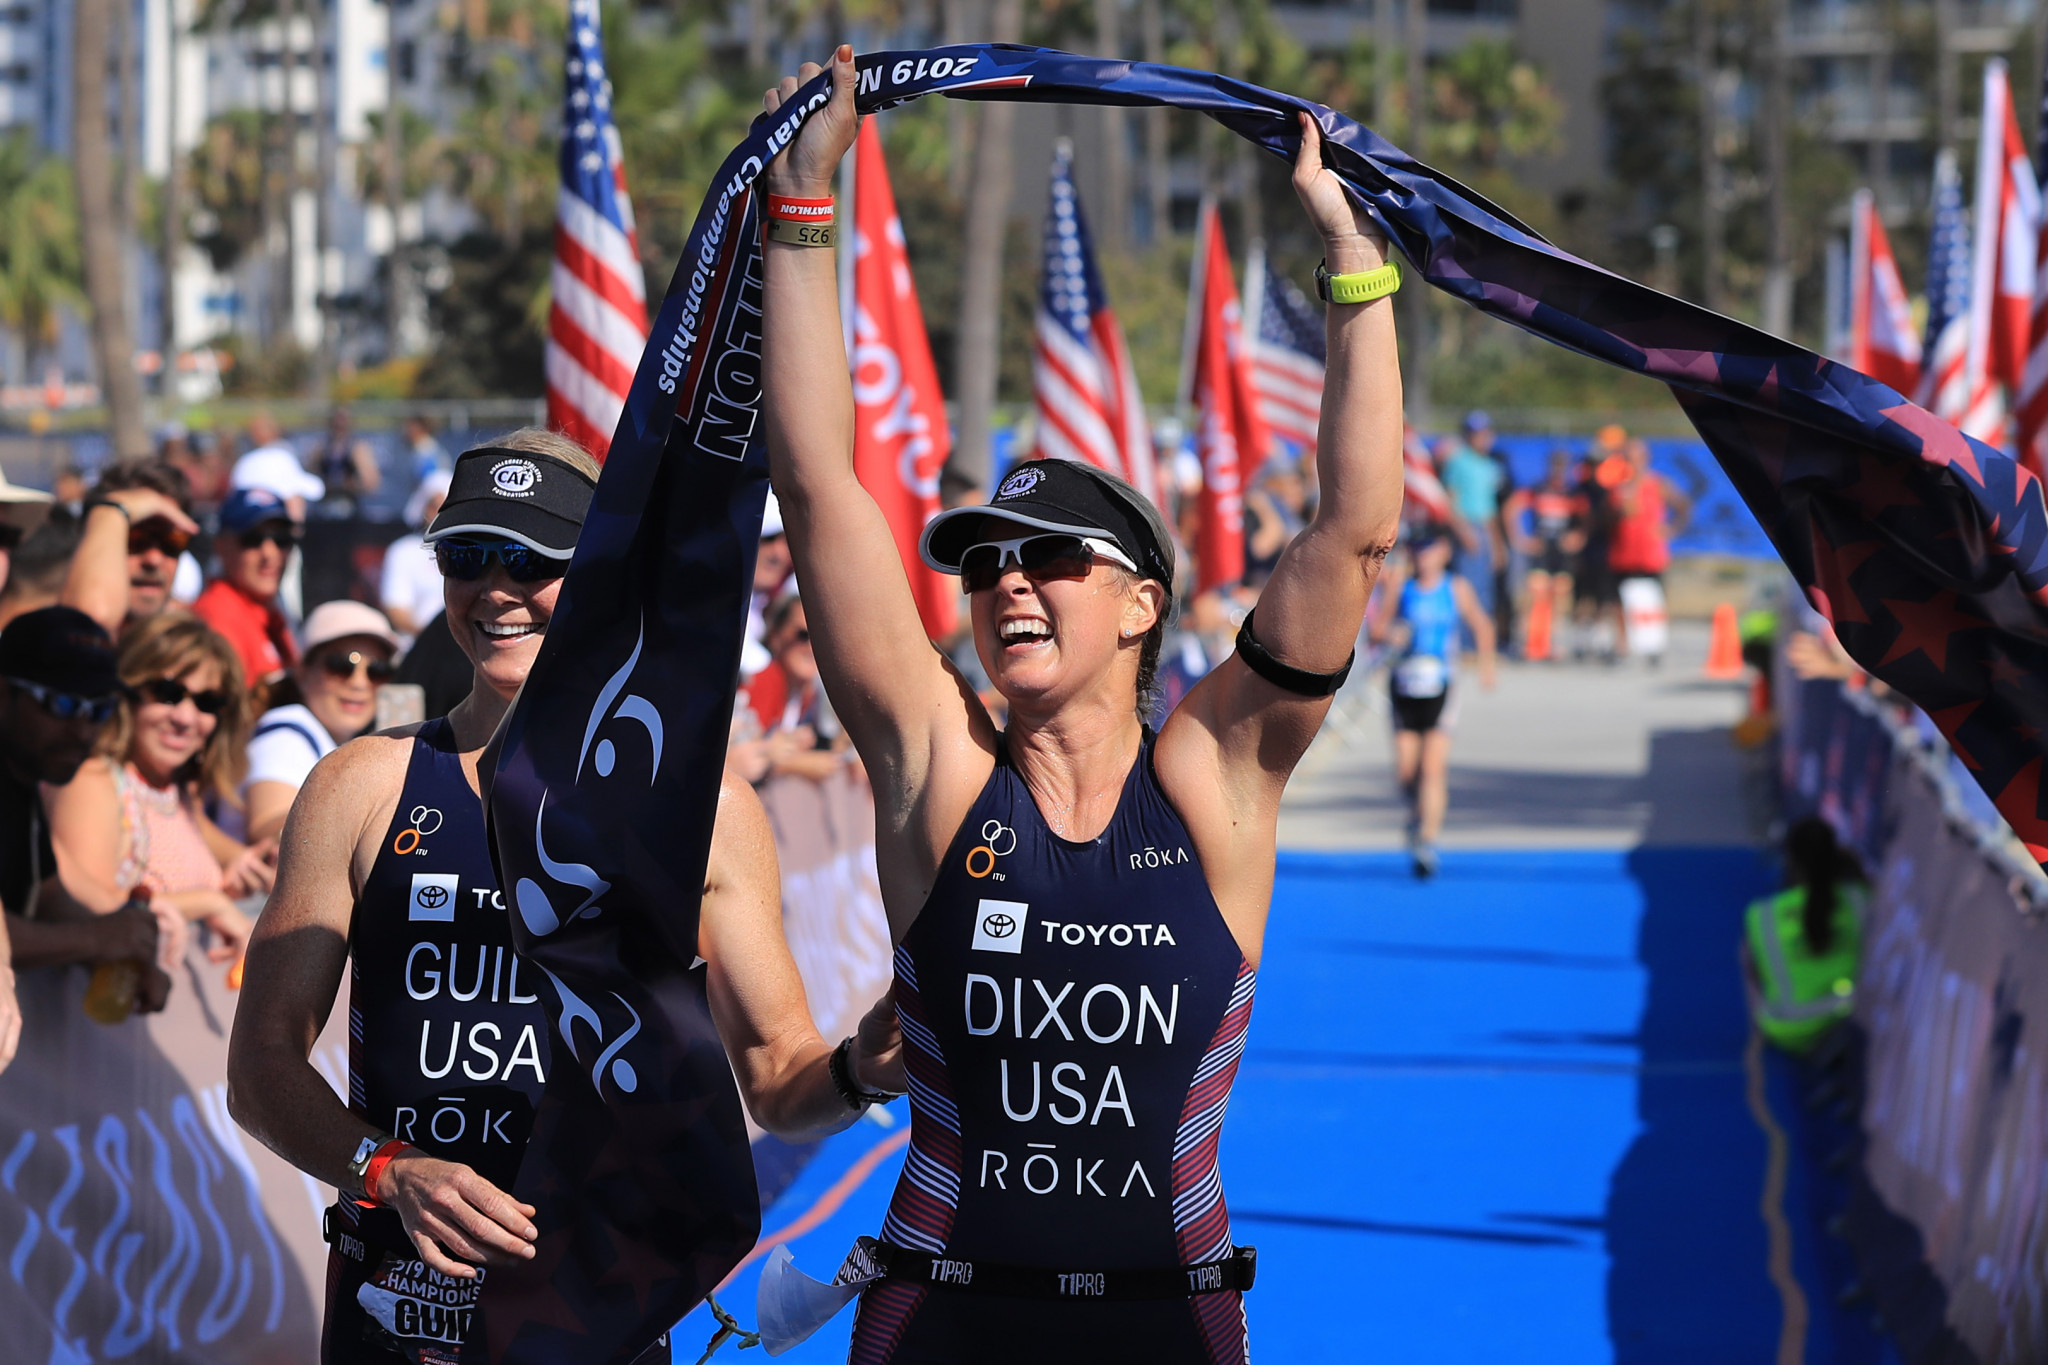 USA Paratriathlon National Championship to take place on Los Angeles